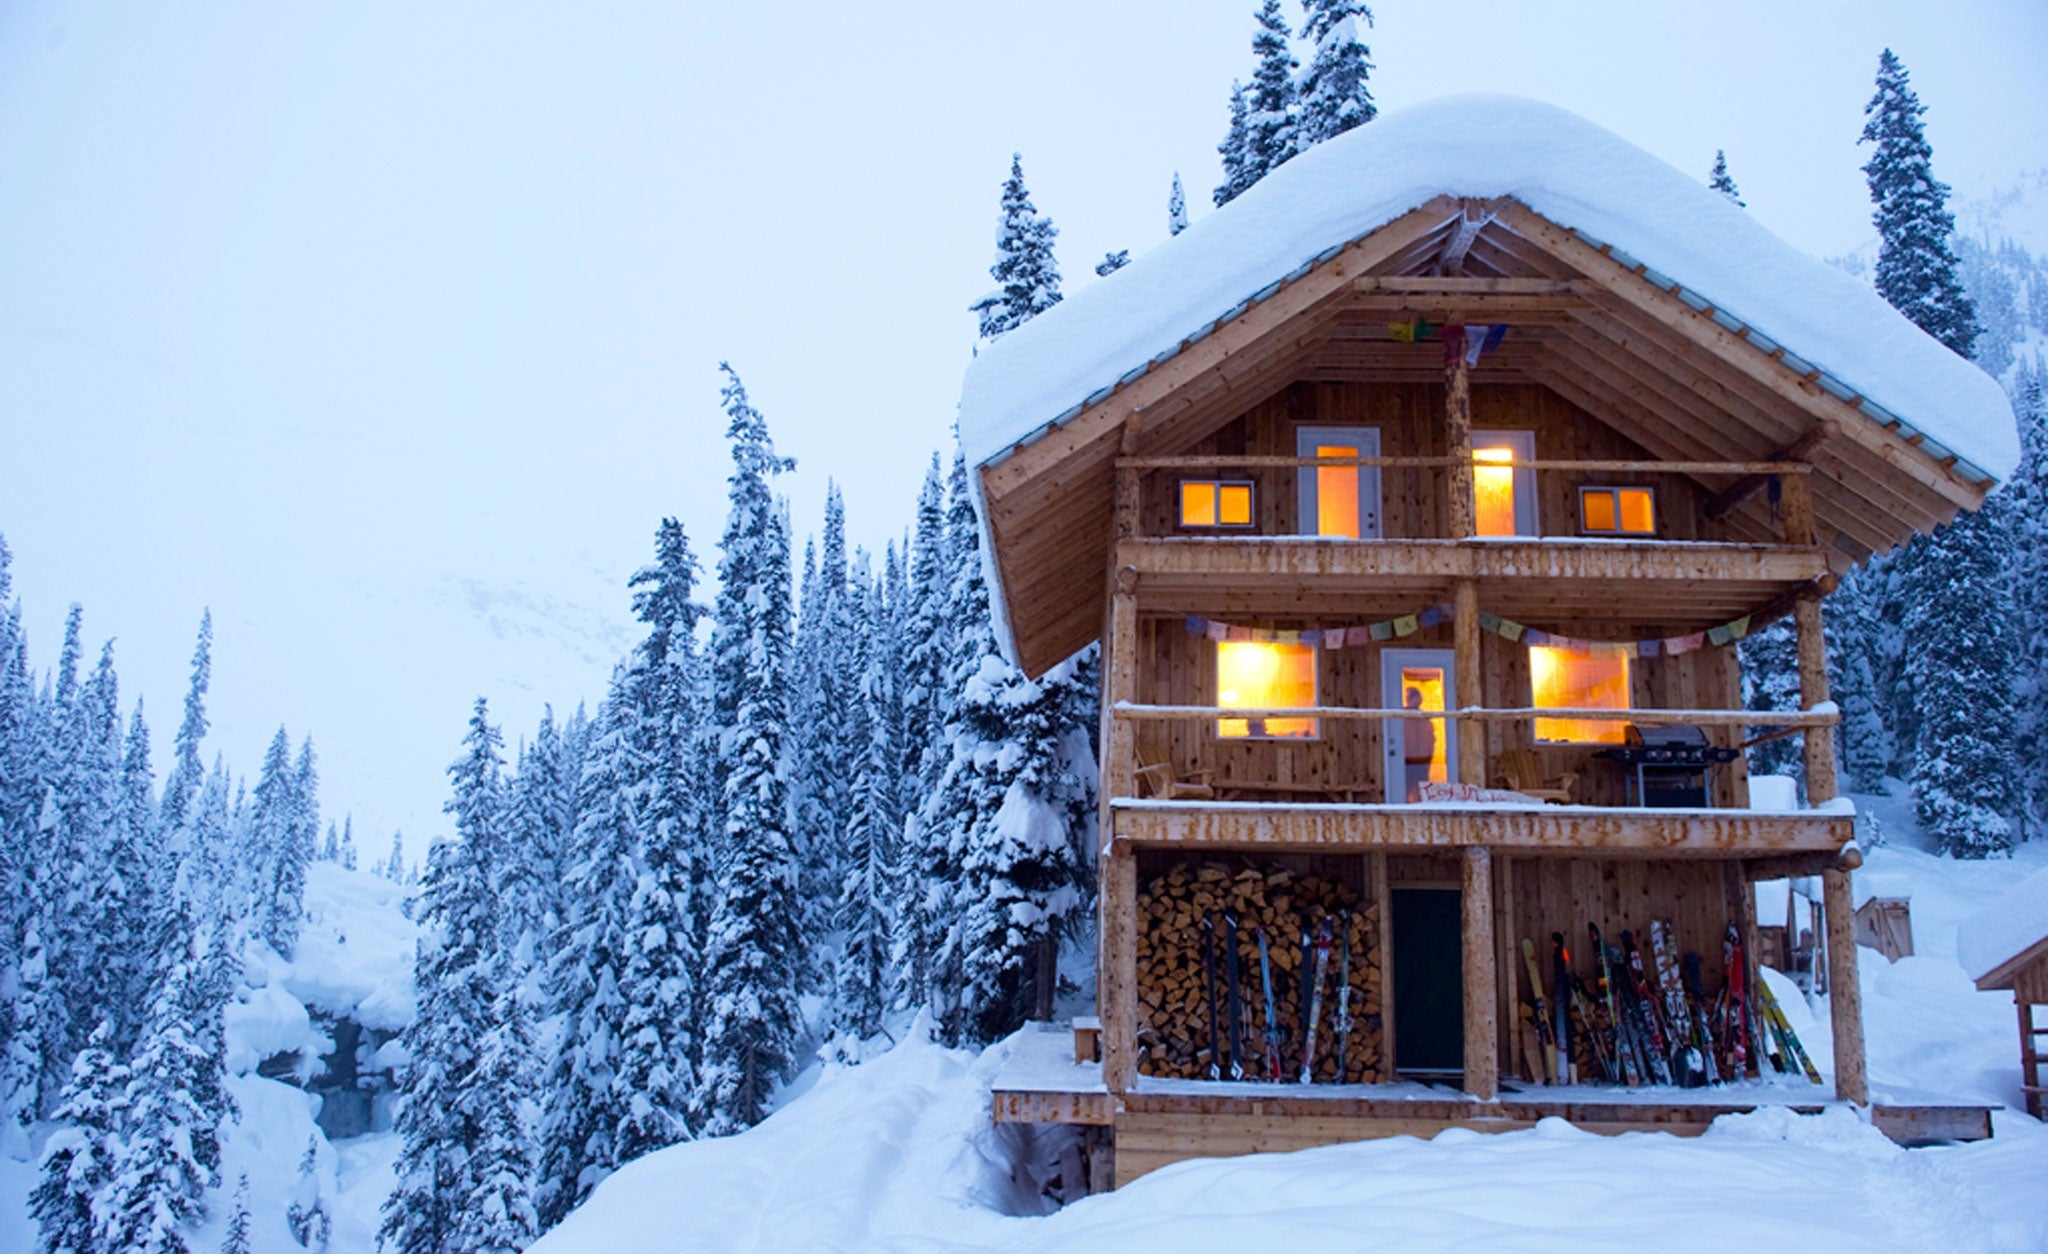 The Snowfall Lodge is an incredible backcountry ski lodge located in the Battle Range of the Selkirk Mountains in British Colmbia.  It is an incredible lodge for backcountry skiing!